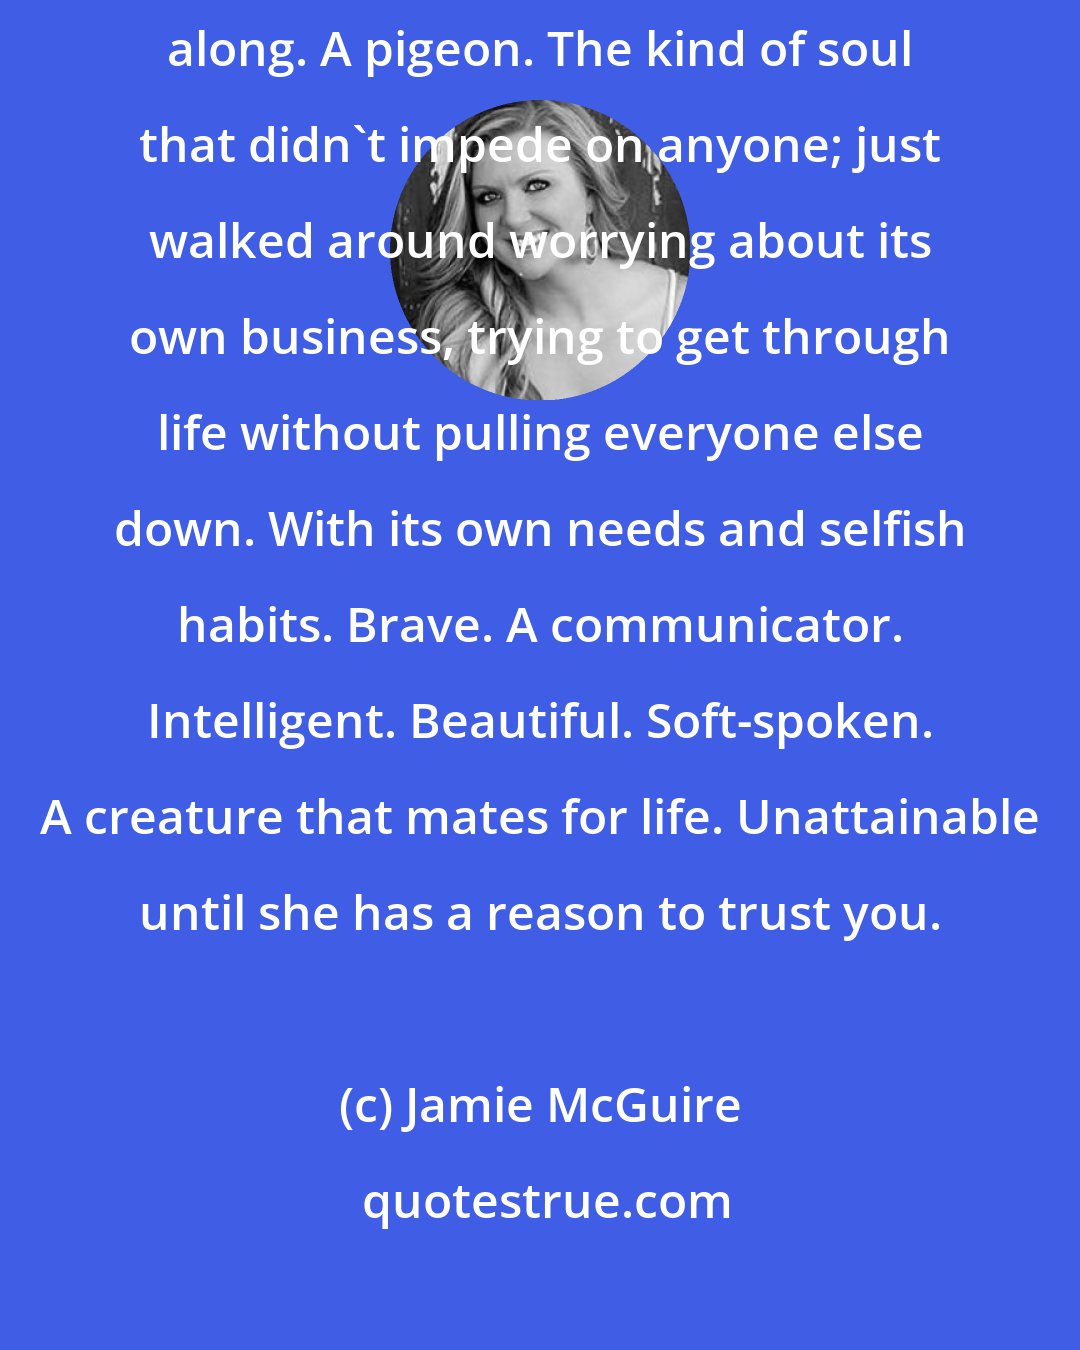 Jamie McGuire: I decided a long time ago I would feed on the vultures until a dove came along. A pigeon. The kind of soul that didn't impede on anyone; just walked around worrying about its own business, trying to get through life without pulling everyone else down. With its own needs and selfish habits. Brave. A communicator. Intelligent. Beautiful. Soft-spoken. A creature that mates for life. Unattainable until she has a reason to trust you.